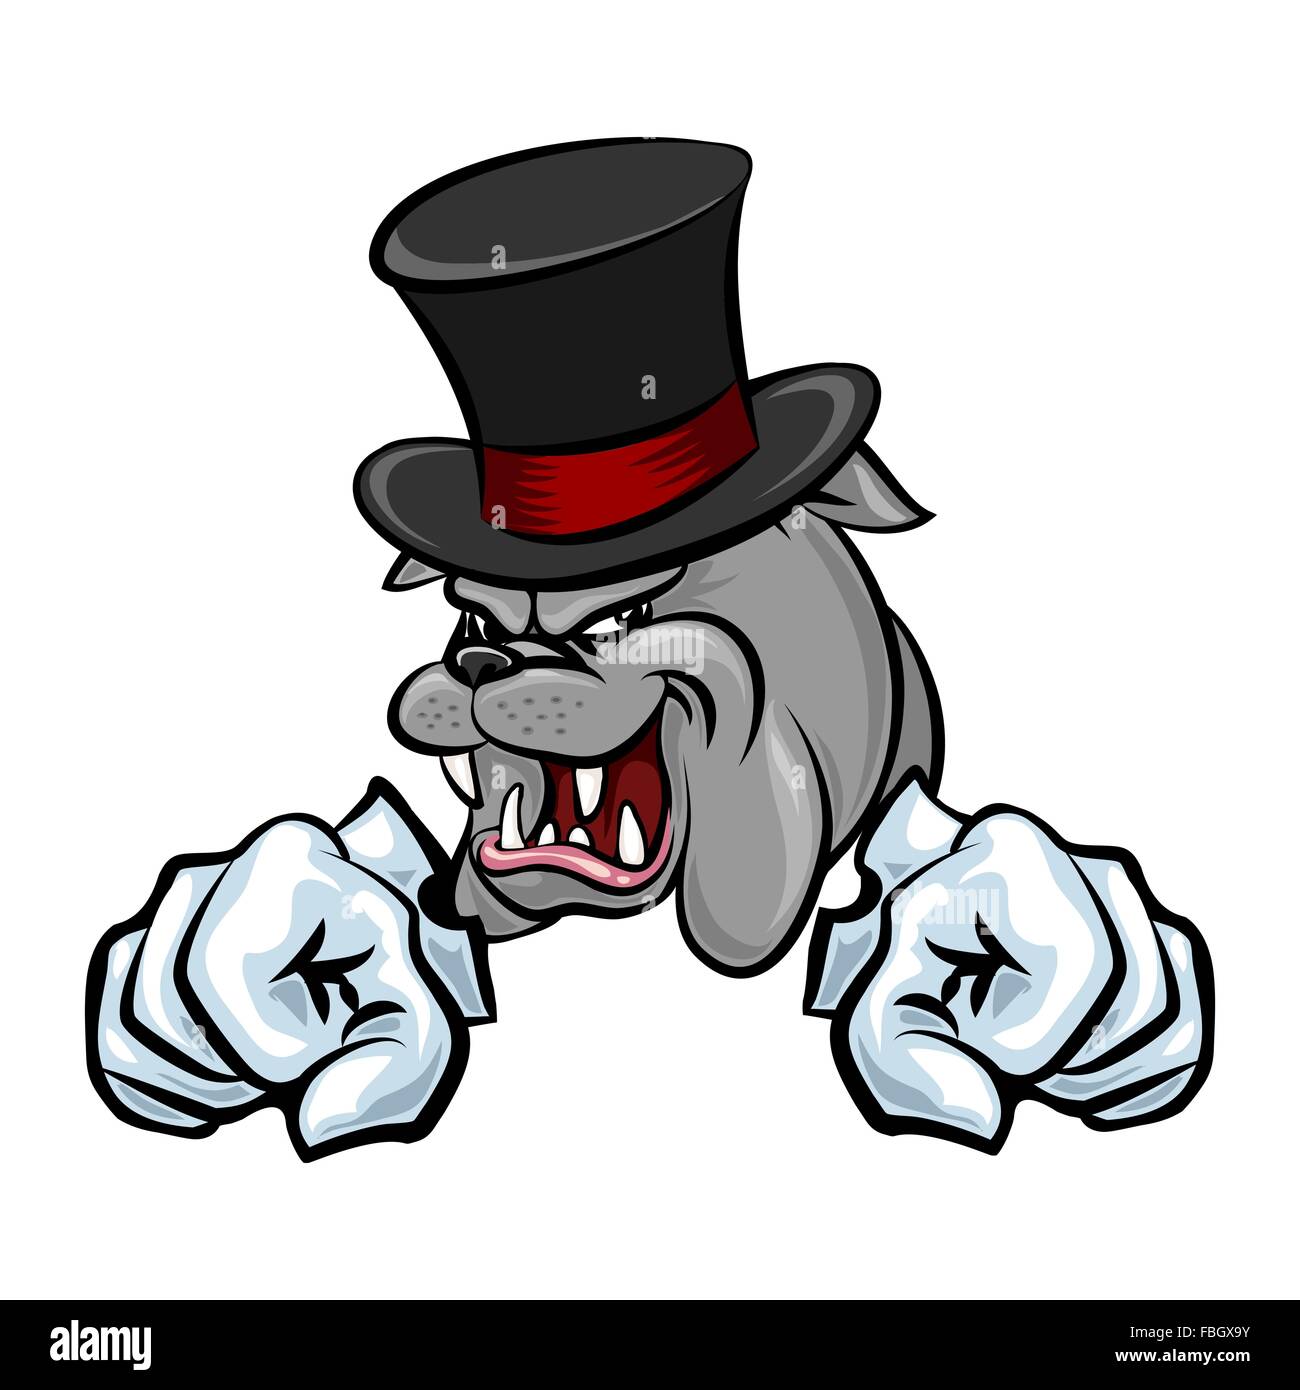 Bulldog in hat and paws in gloves. Cartoon style. Isolated on white. Stock Vector